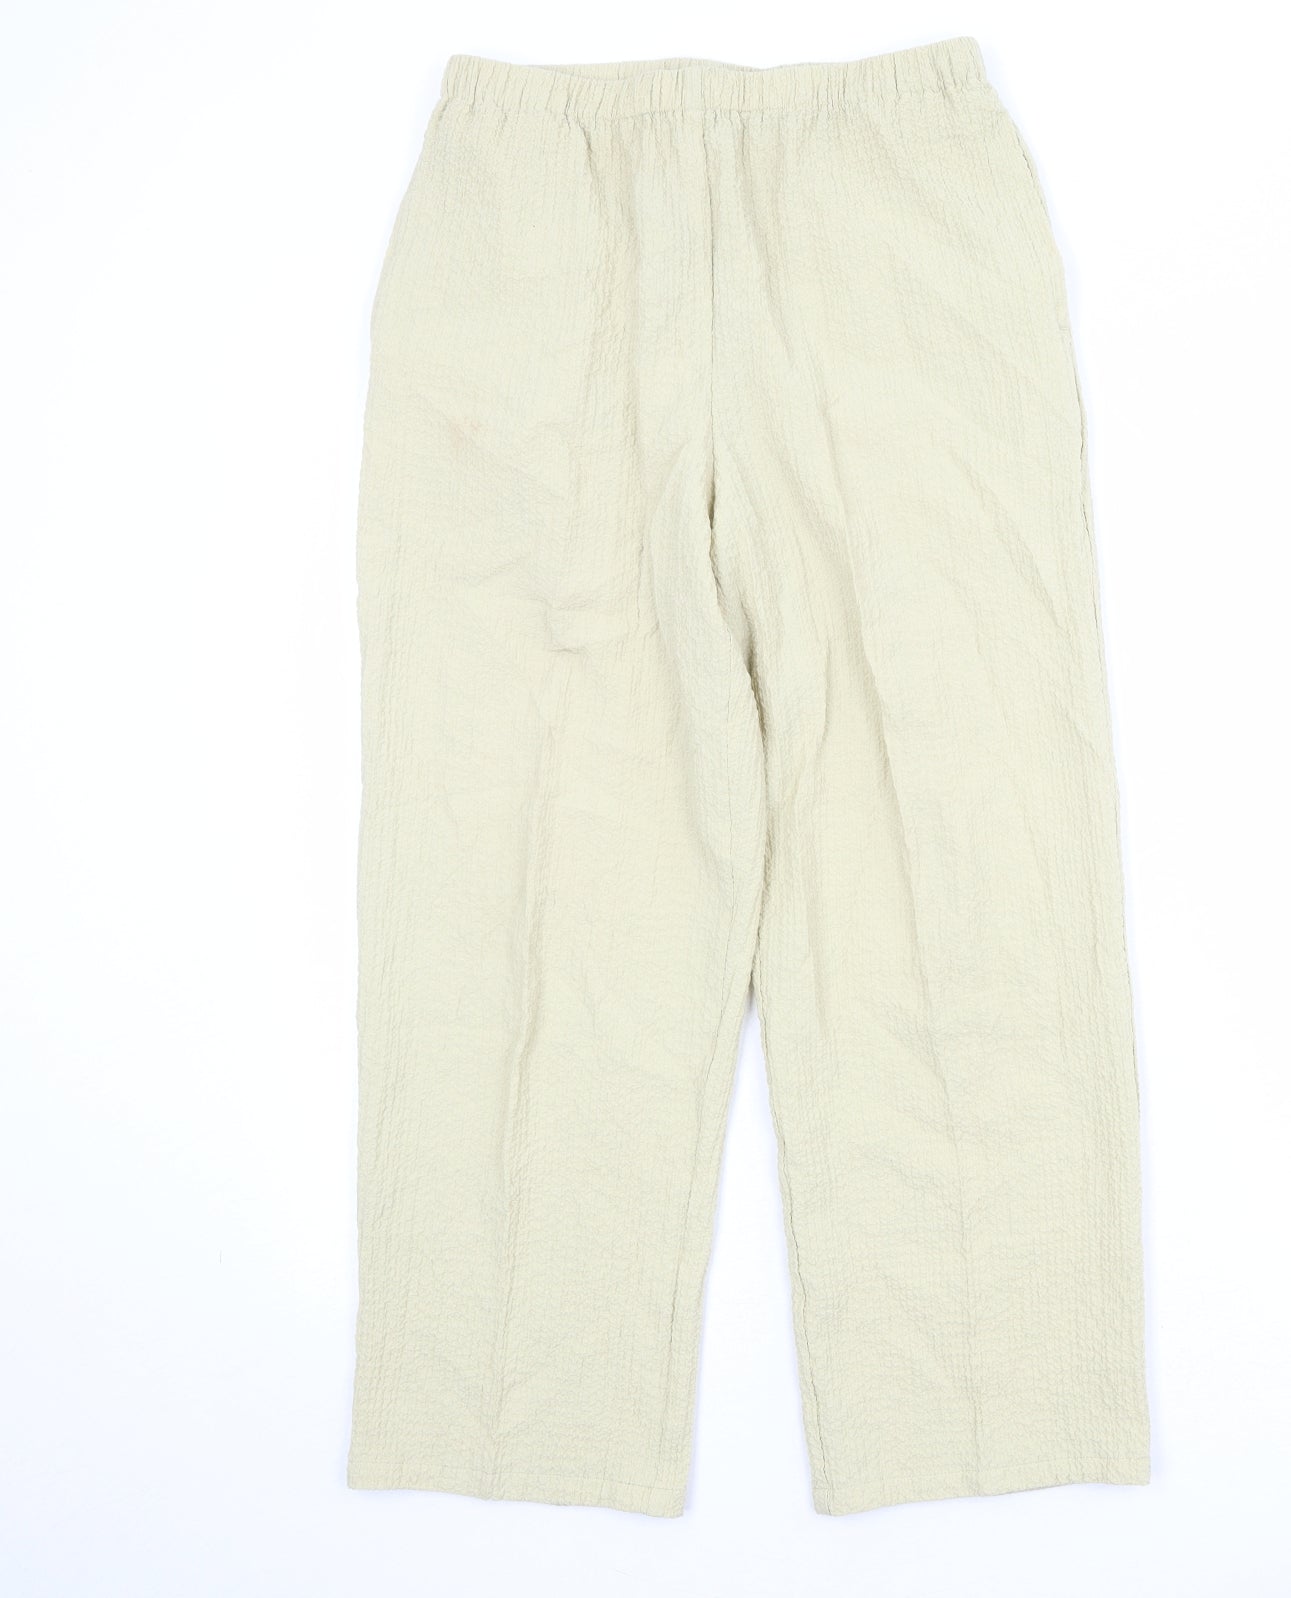 Orvis Womens Beige Viscose Trousers Size S Regular - Textured